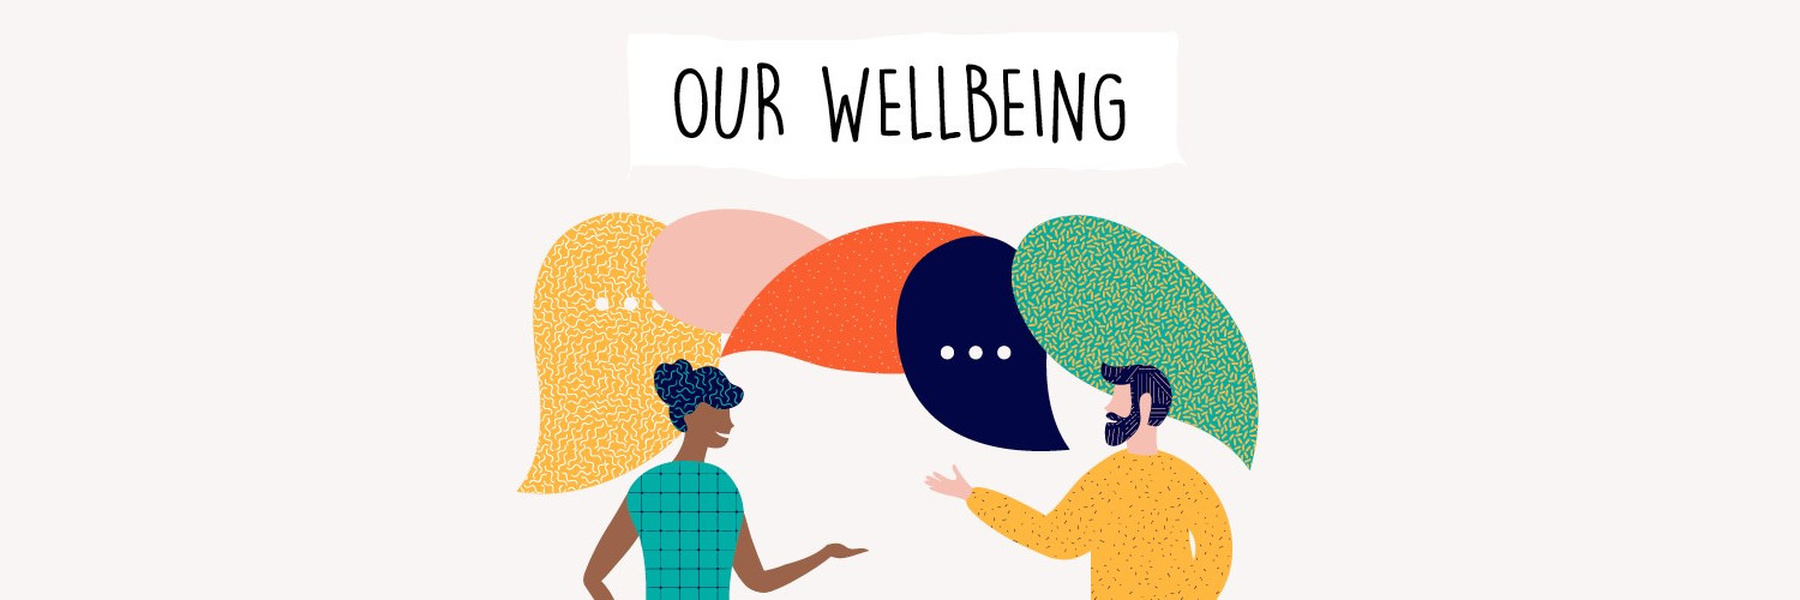 Wellbeing and Mental Health During Covid-19